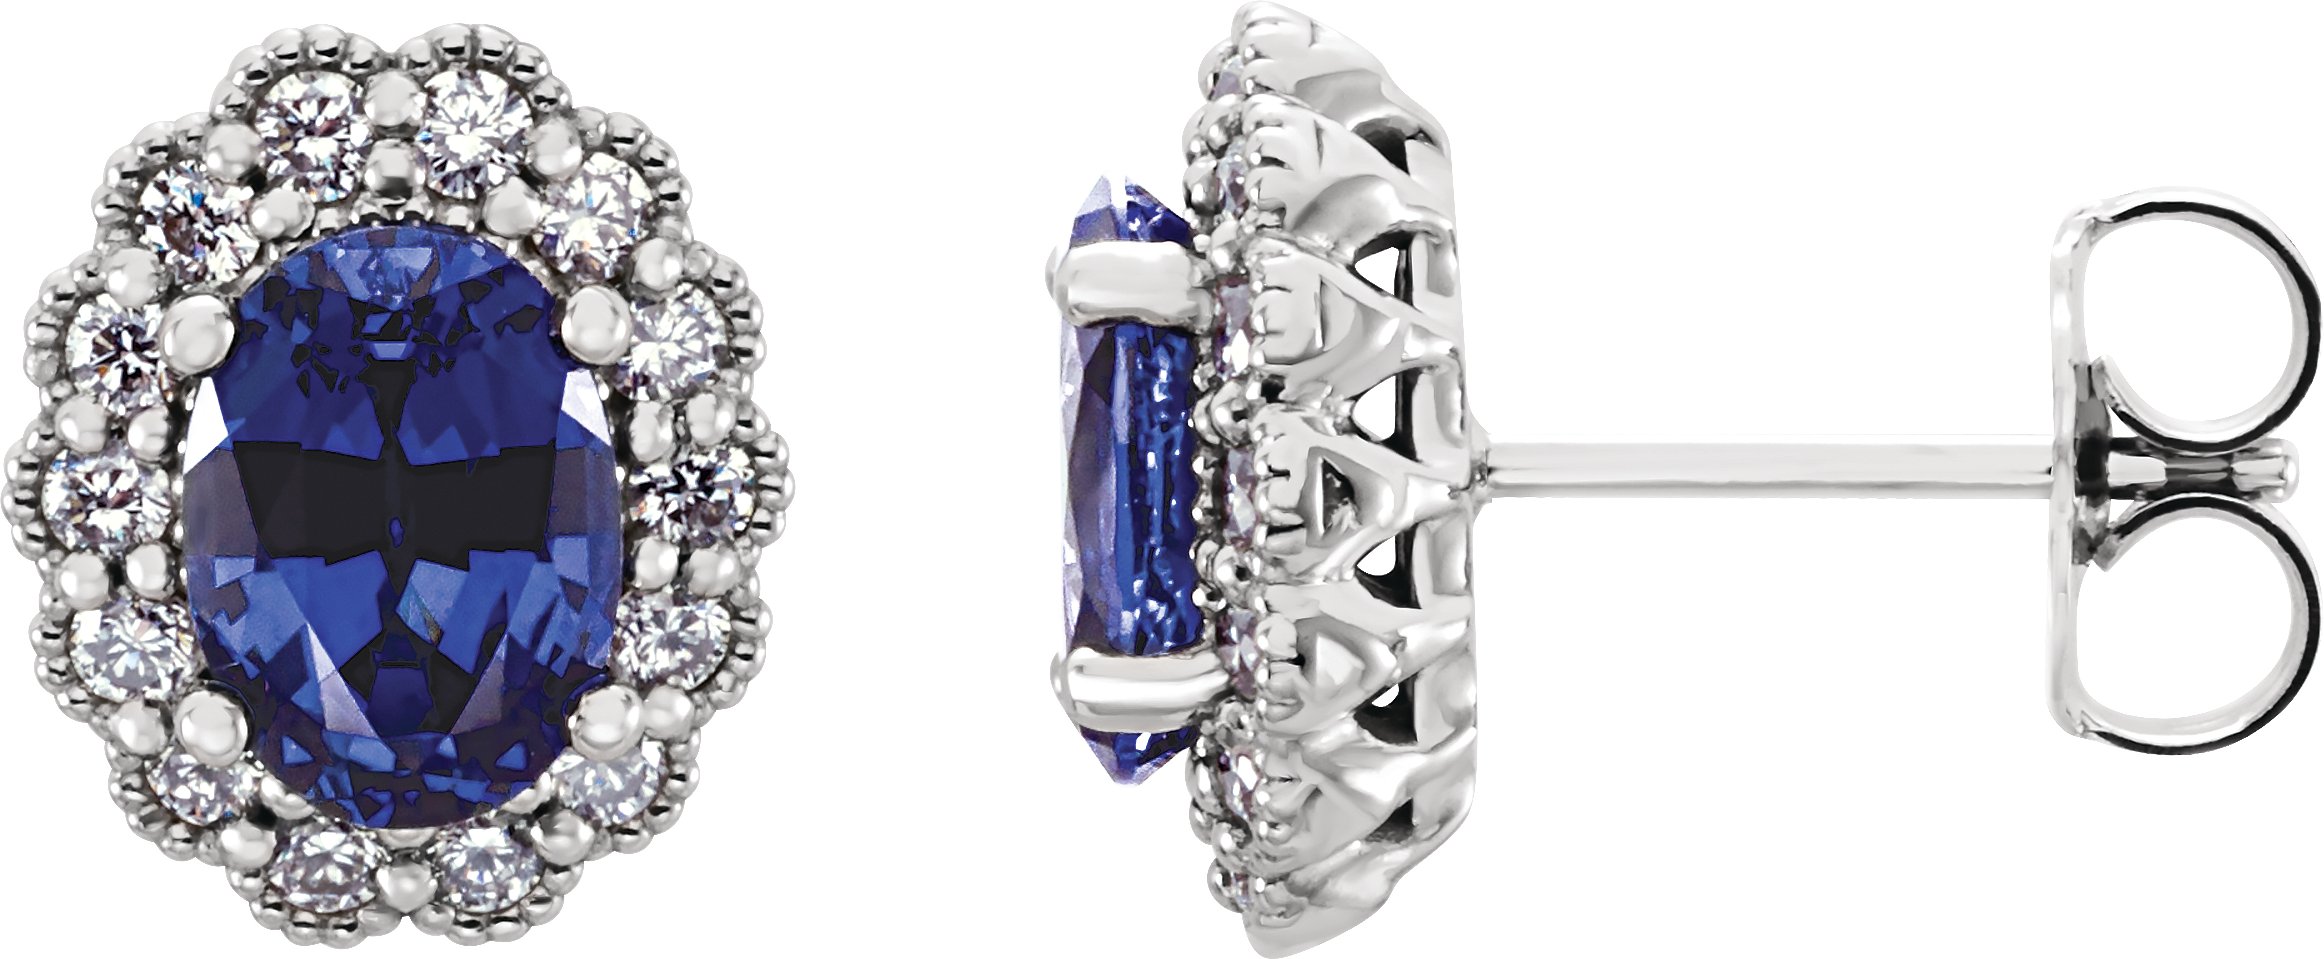 Chatham® Created Blue Sapphire & Diamond Halo-Style Earrings or Mounting